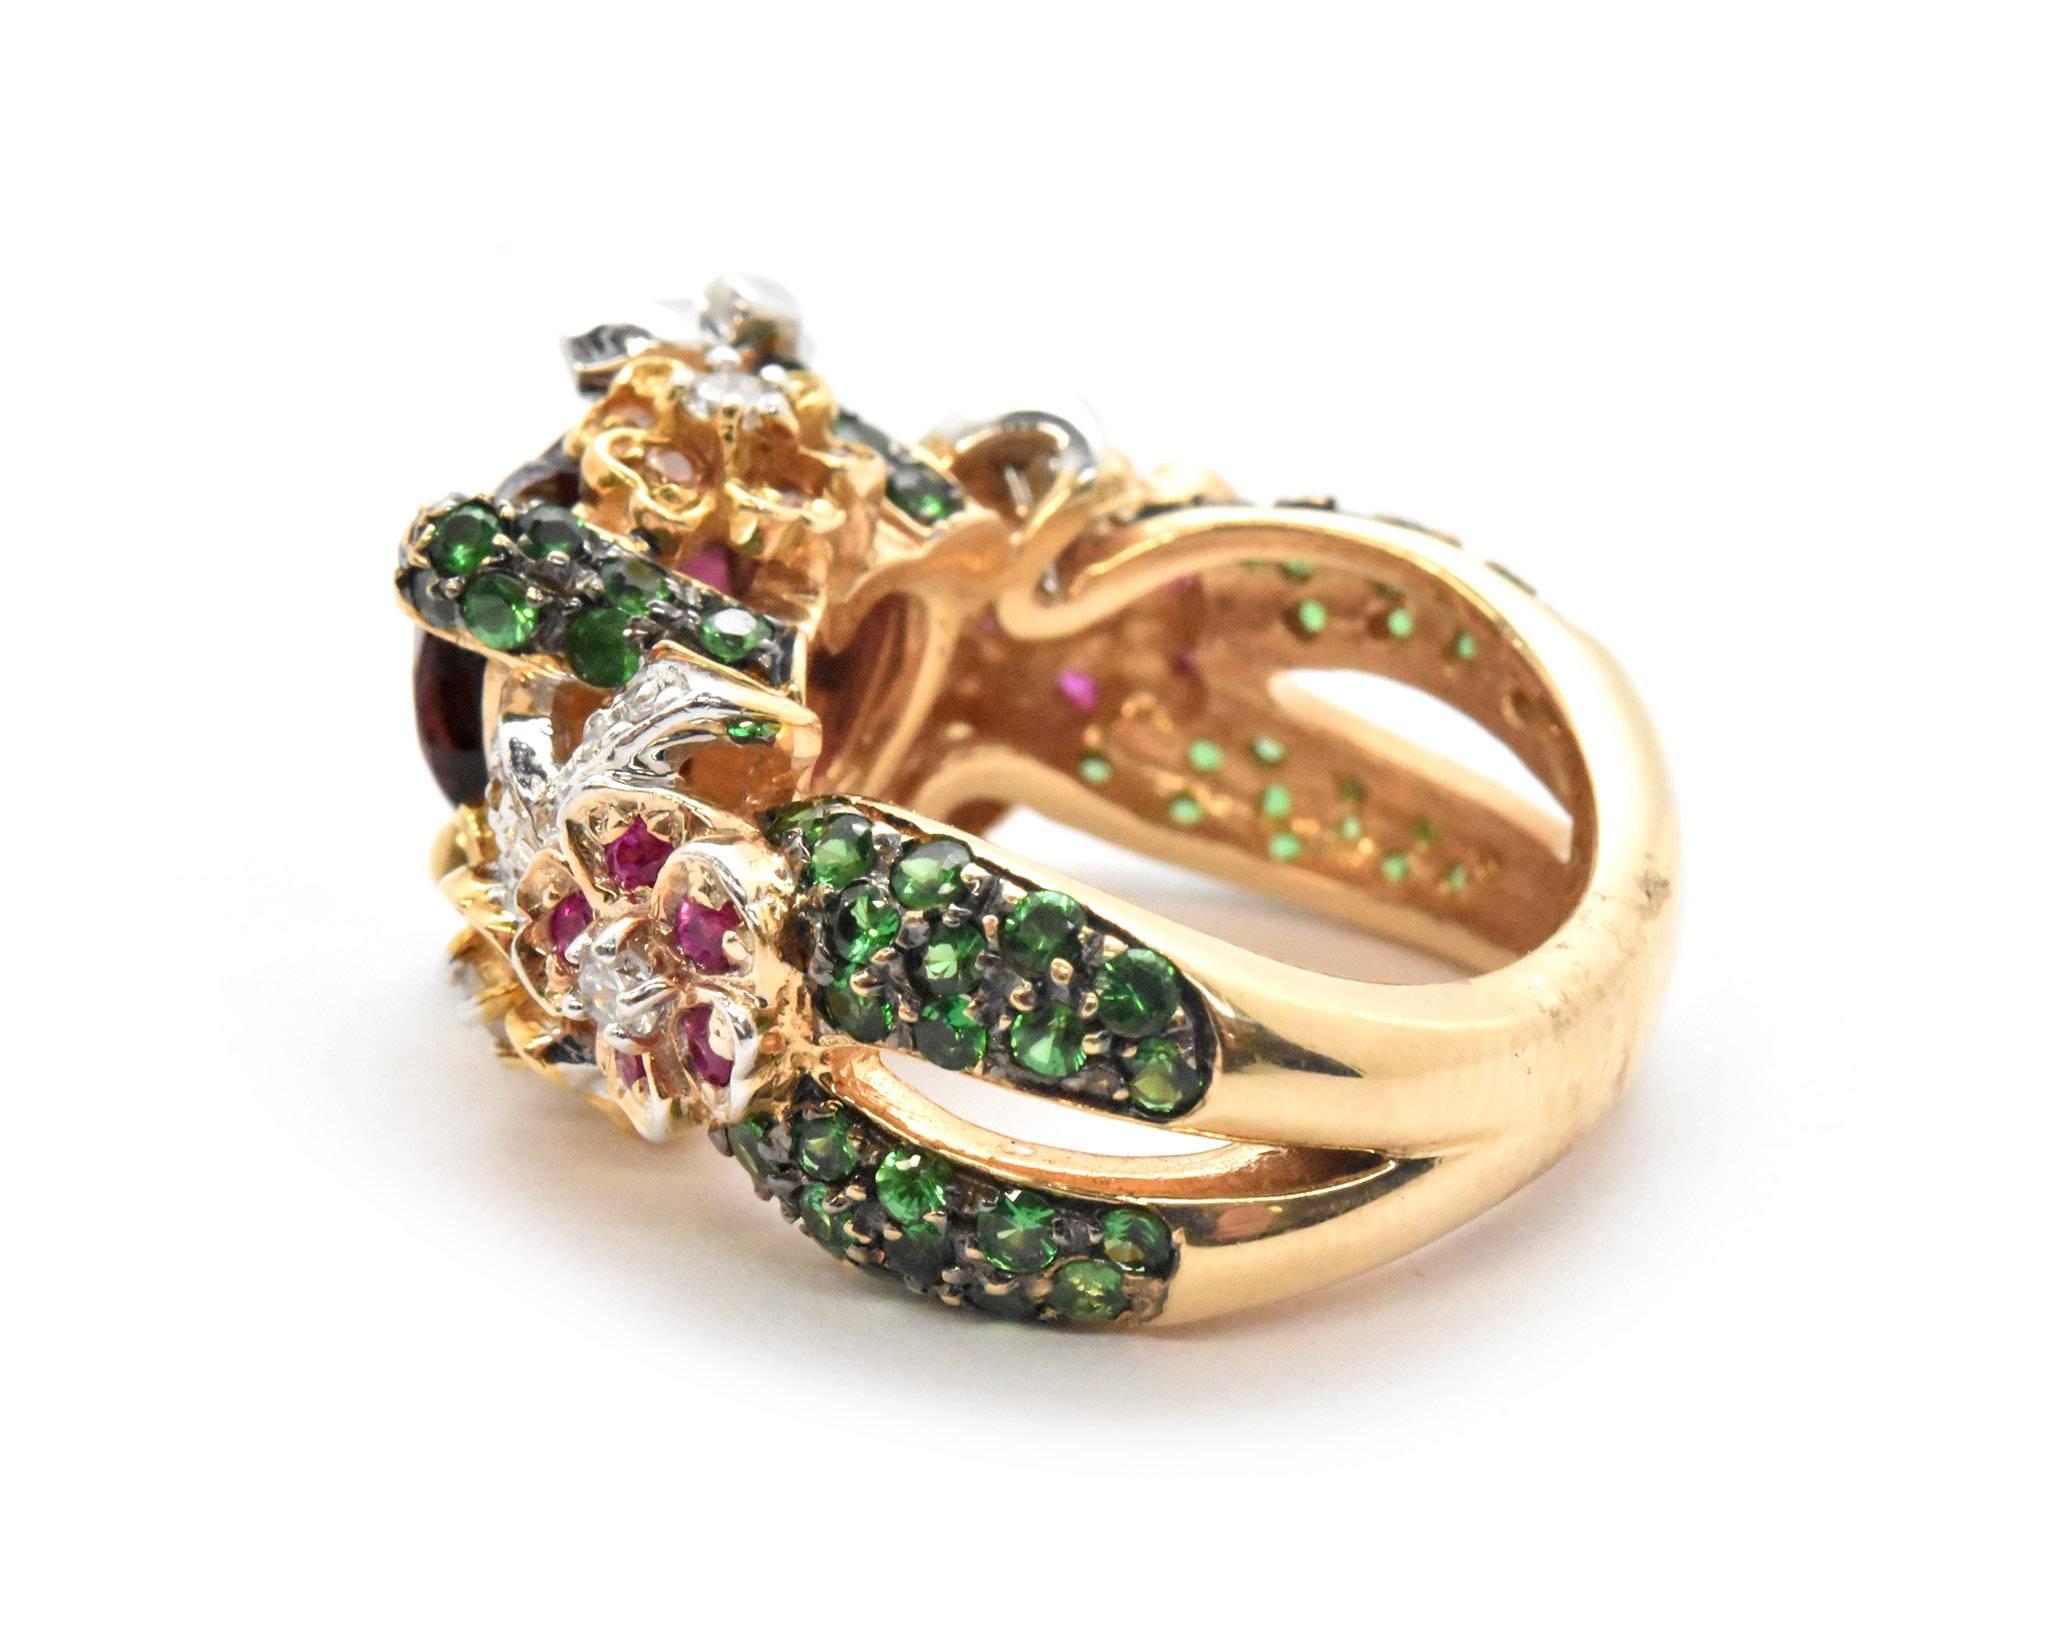 Trillion Cut Red Garnet Two-Tone Cocktail Ring with Diamonds, Tsavorites and Sapphires